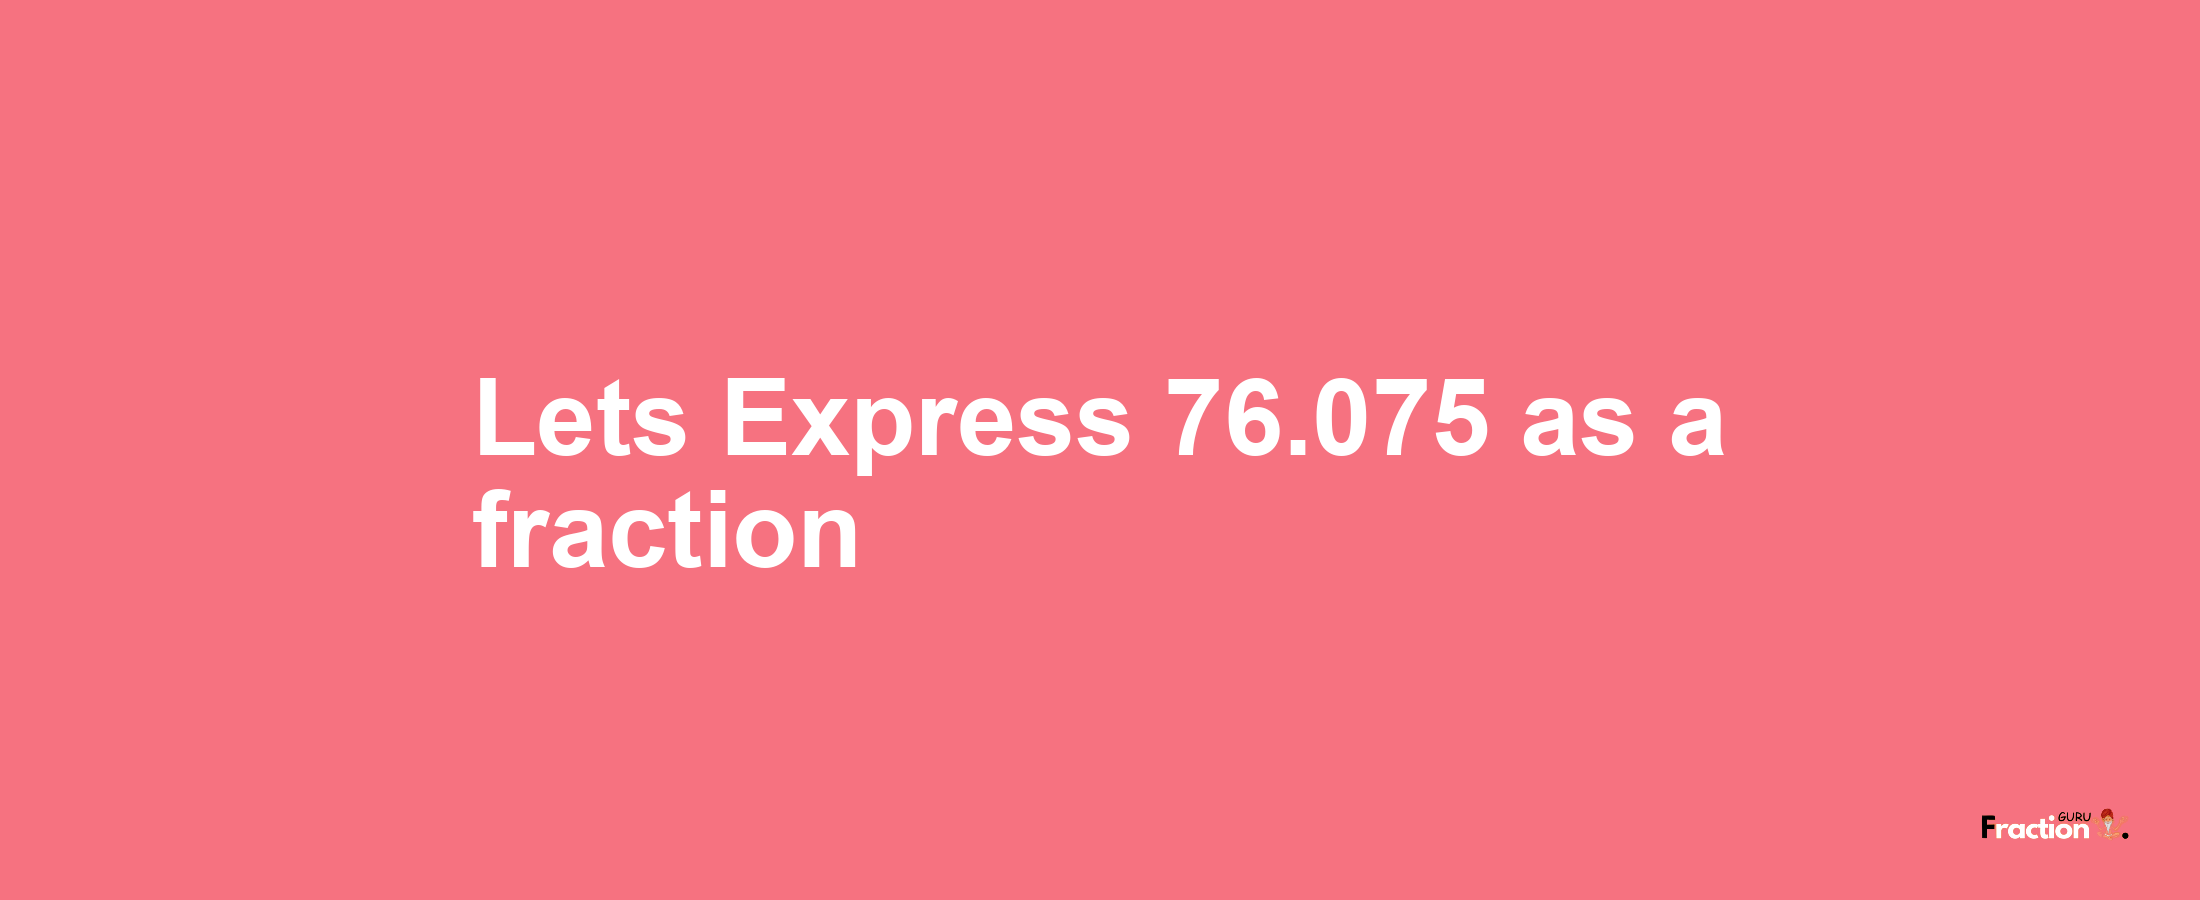 Lets Express 76.075 as afraction